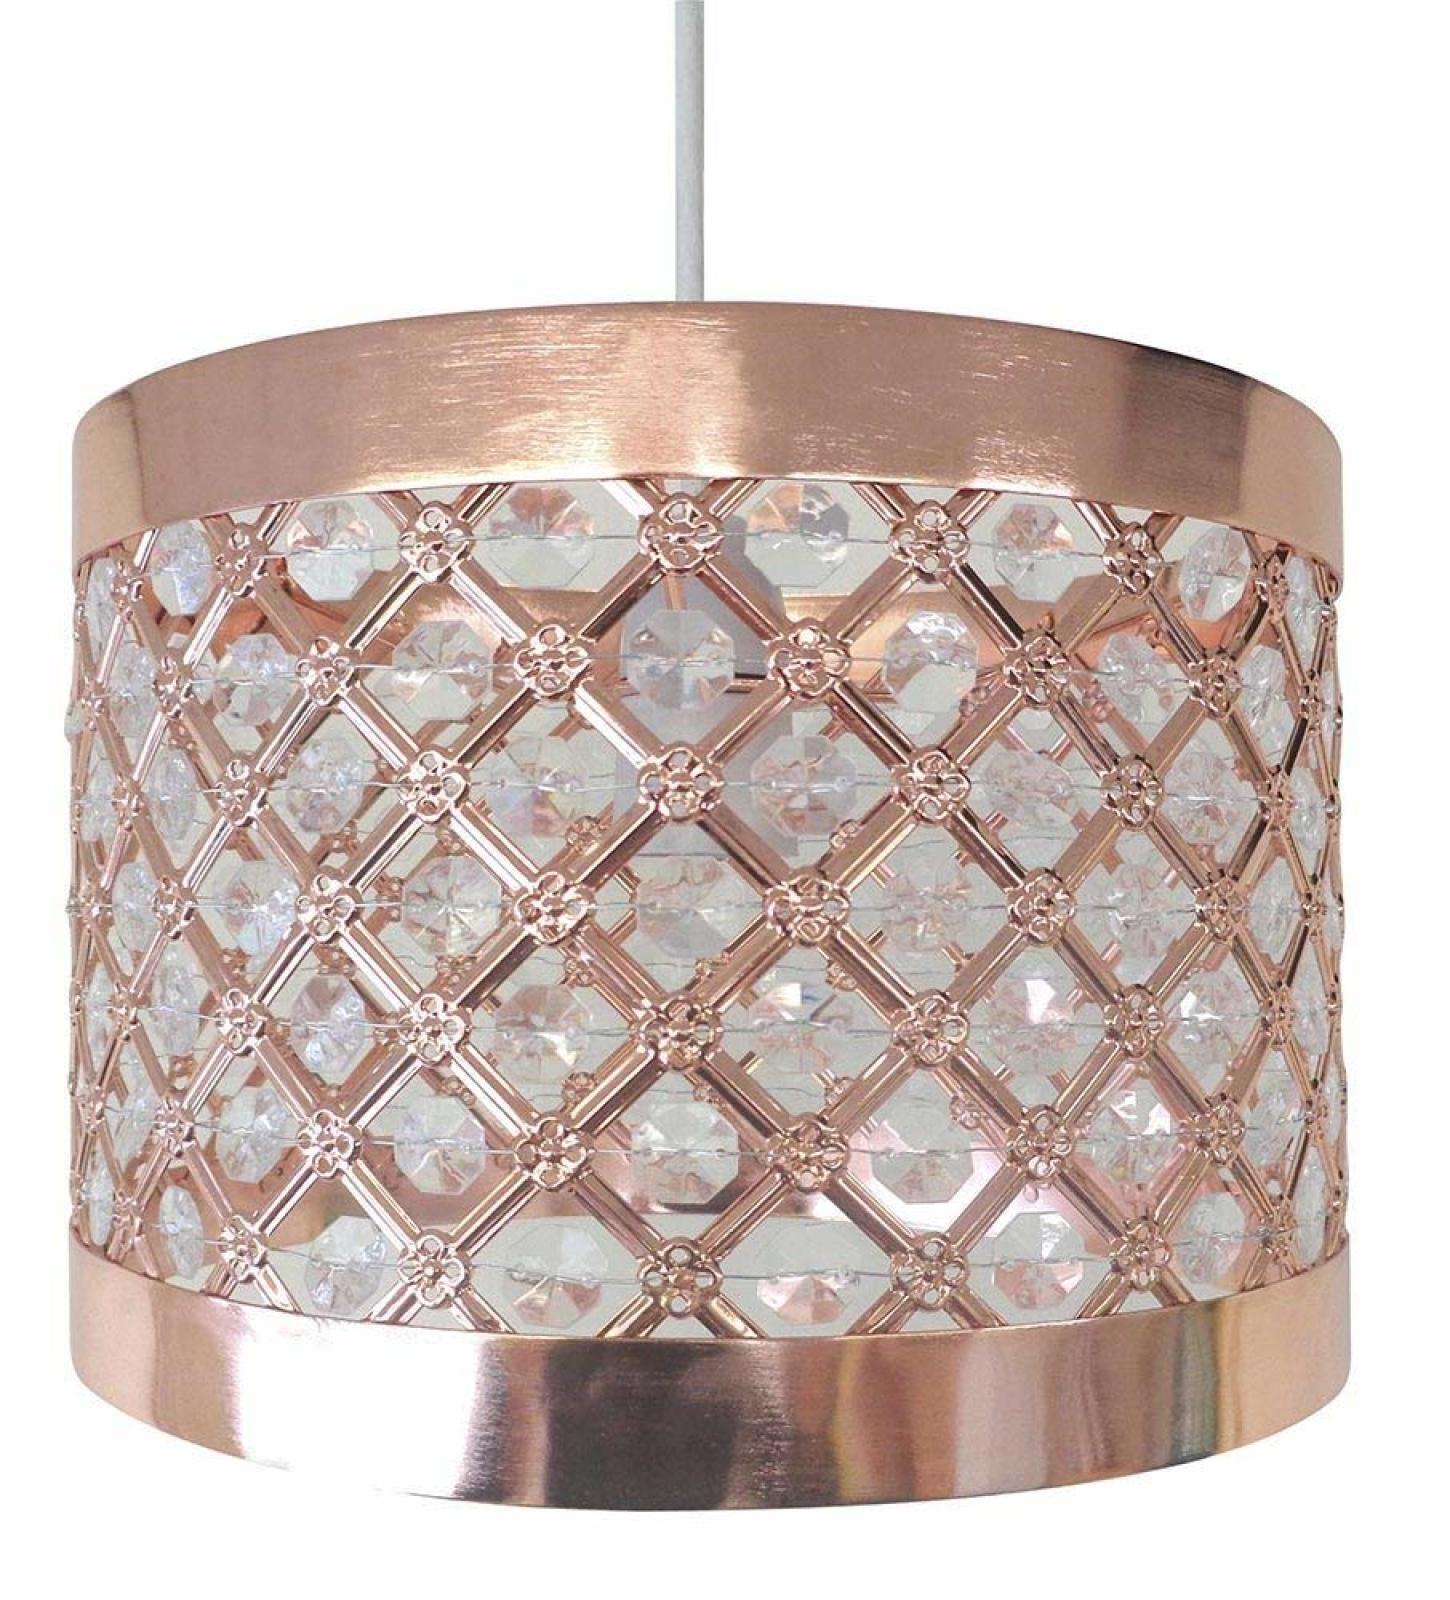 Rose Gold Bedroom Accessories Sparkly Ceiling Pendant Light Shade Fittings Moda 5023674150302 Ebay